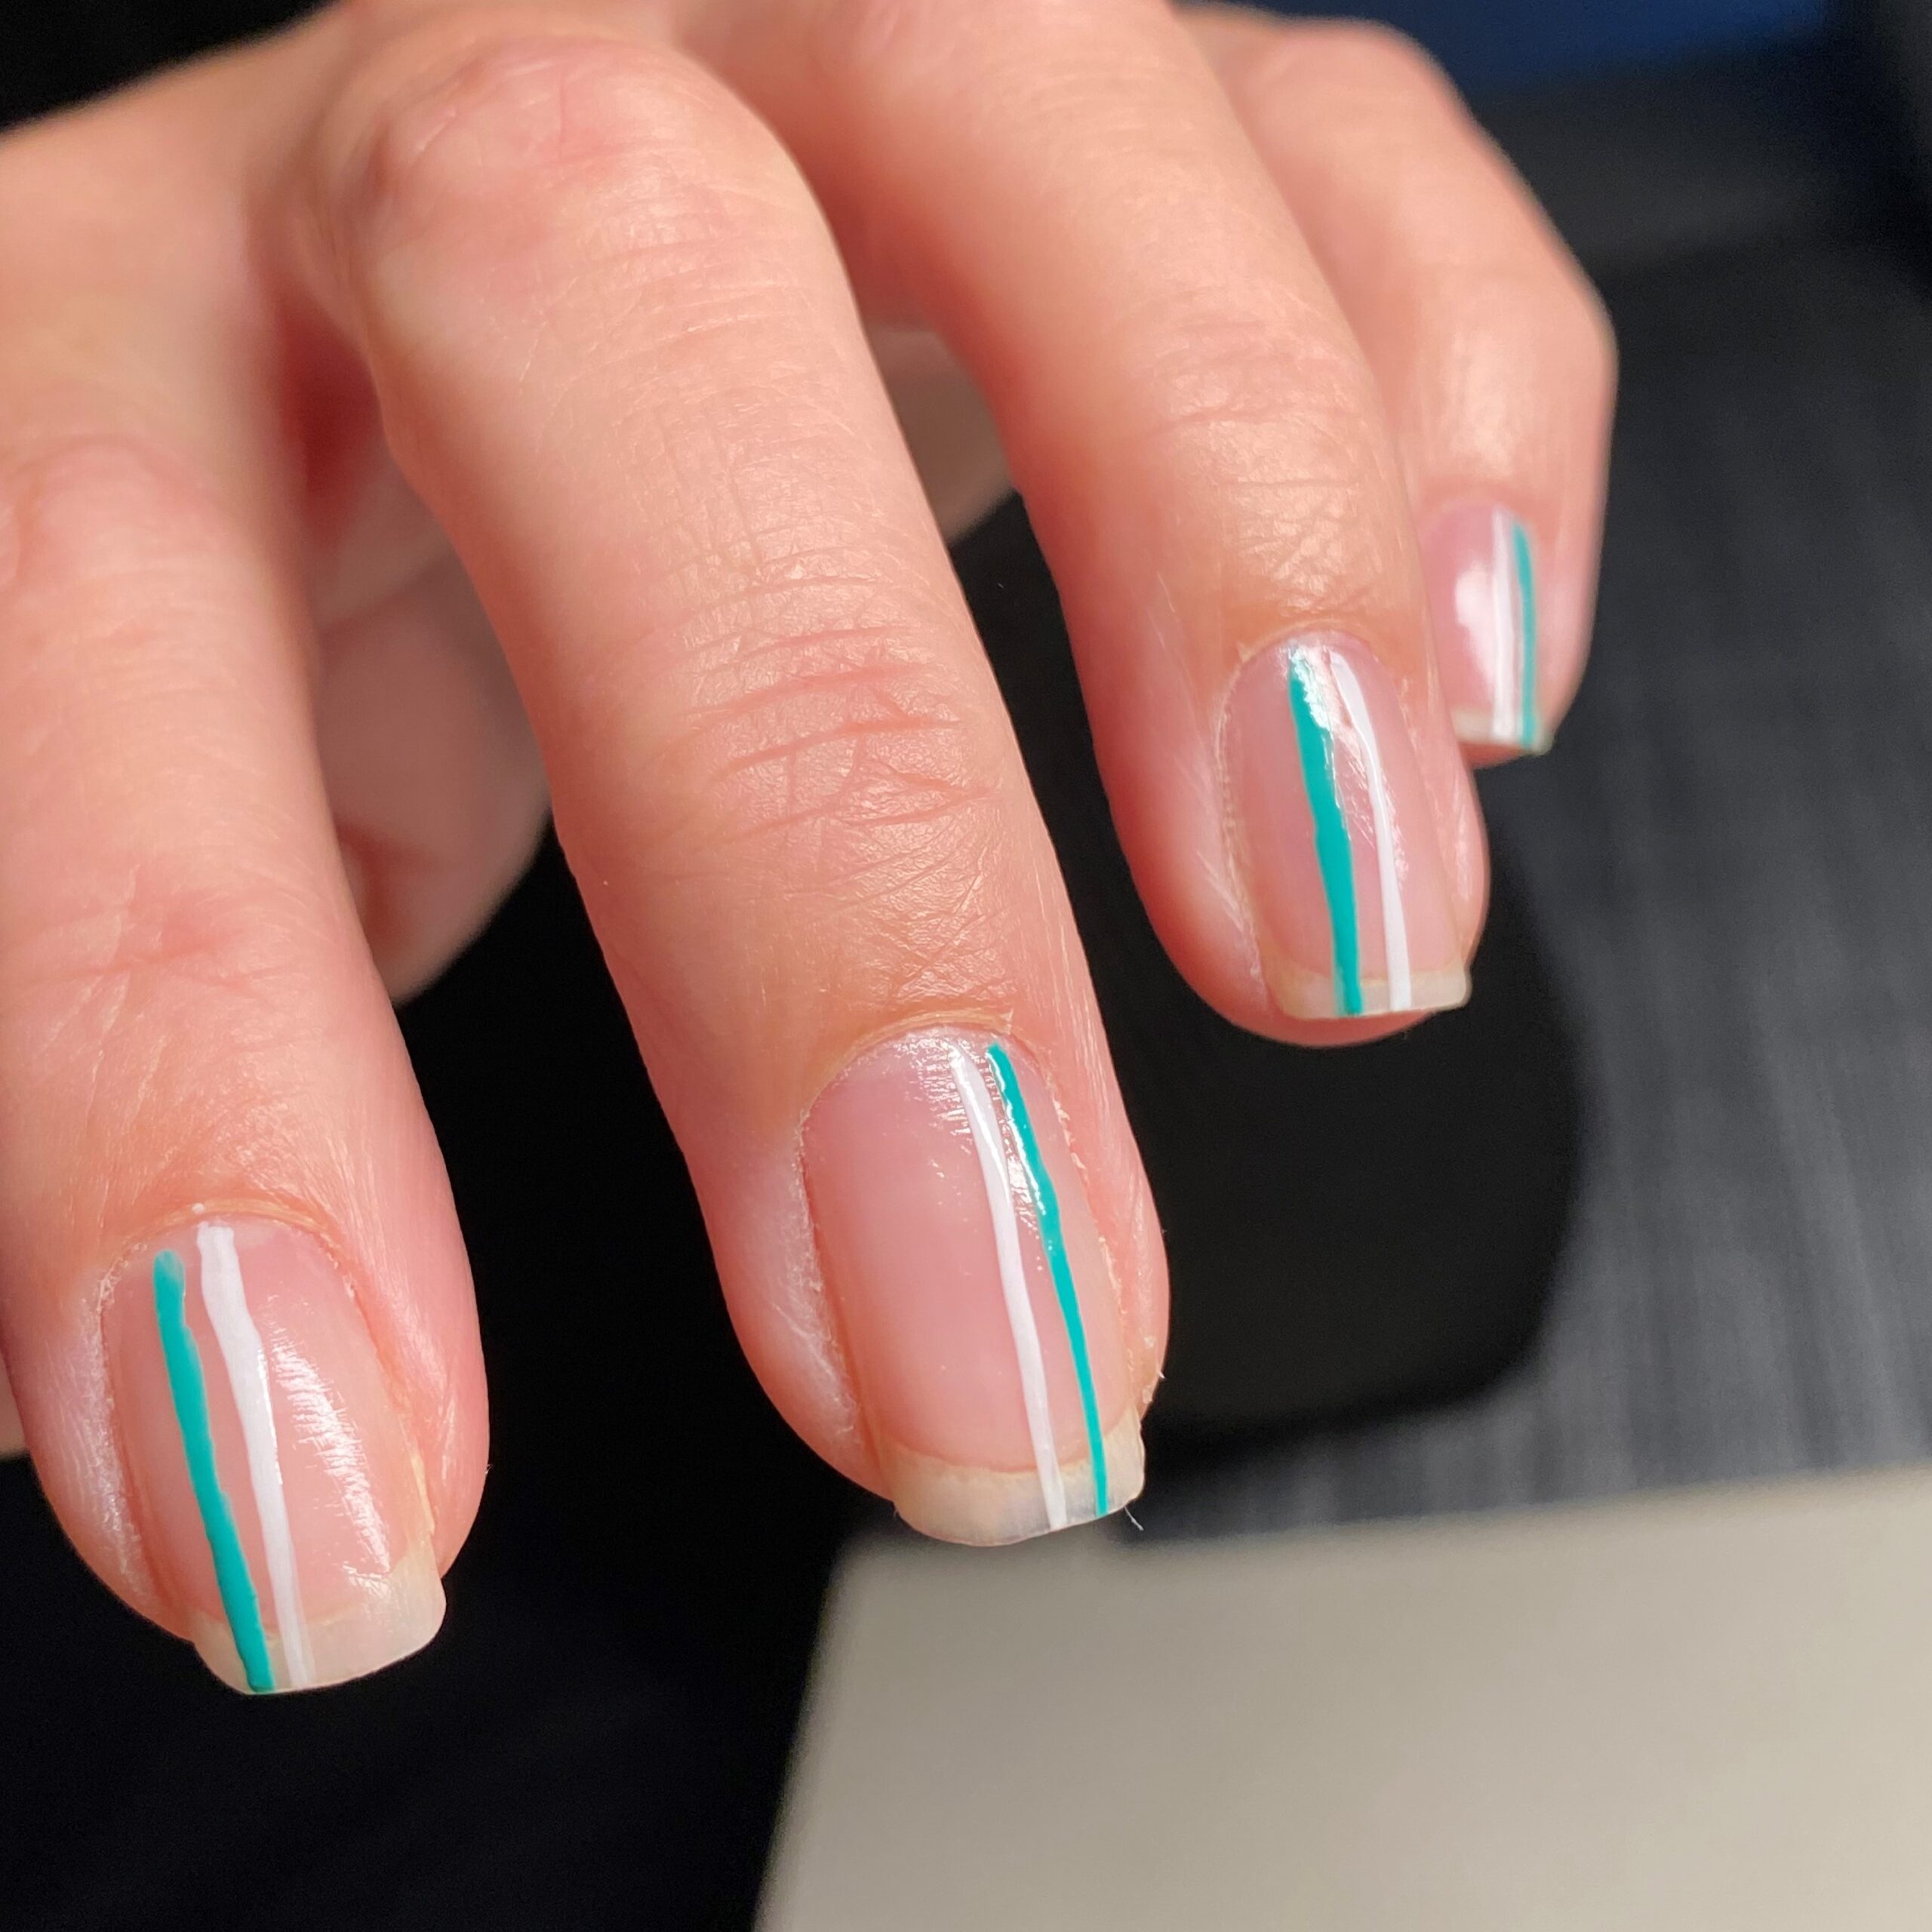 Straight lines | Lines on nails, Line nail designs, Nail designs